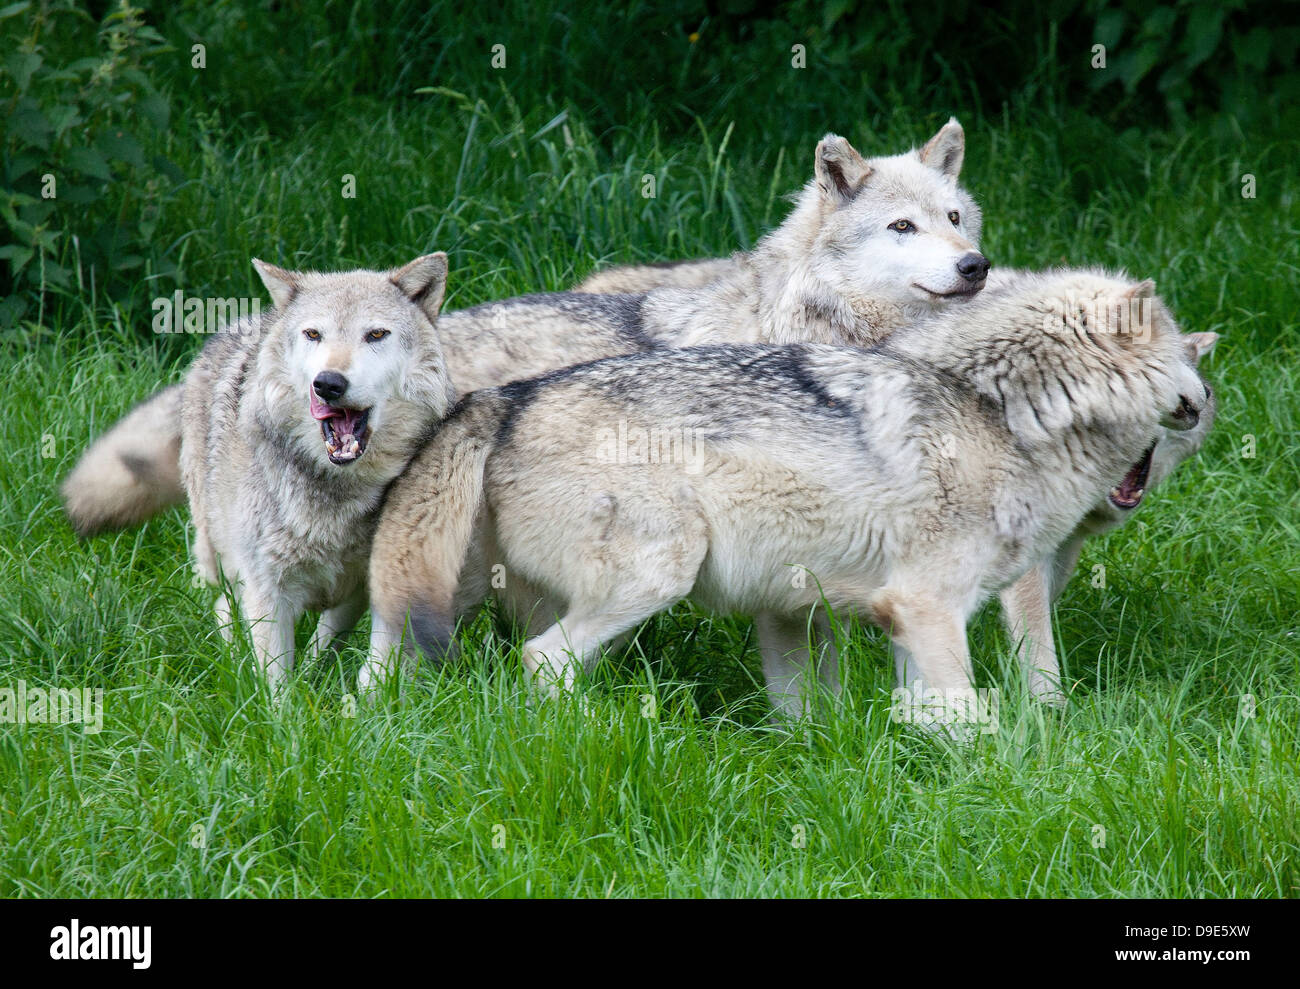 A pack of European Grey Wolves playing in grass Stock Photo